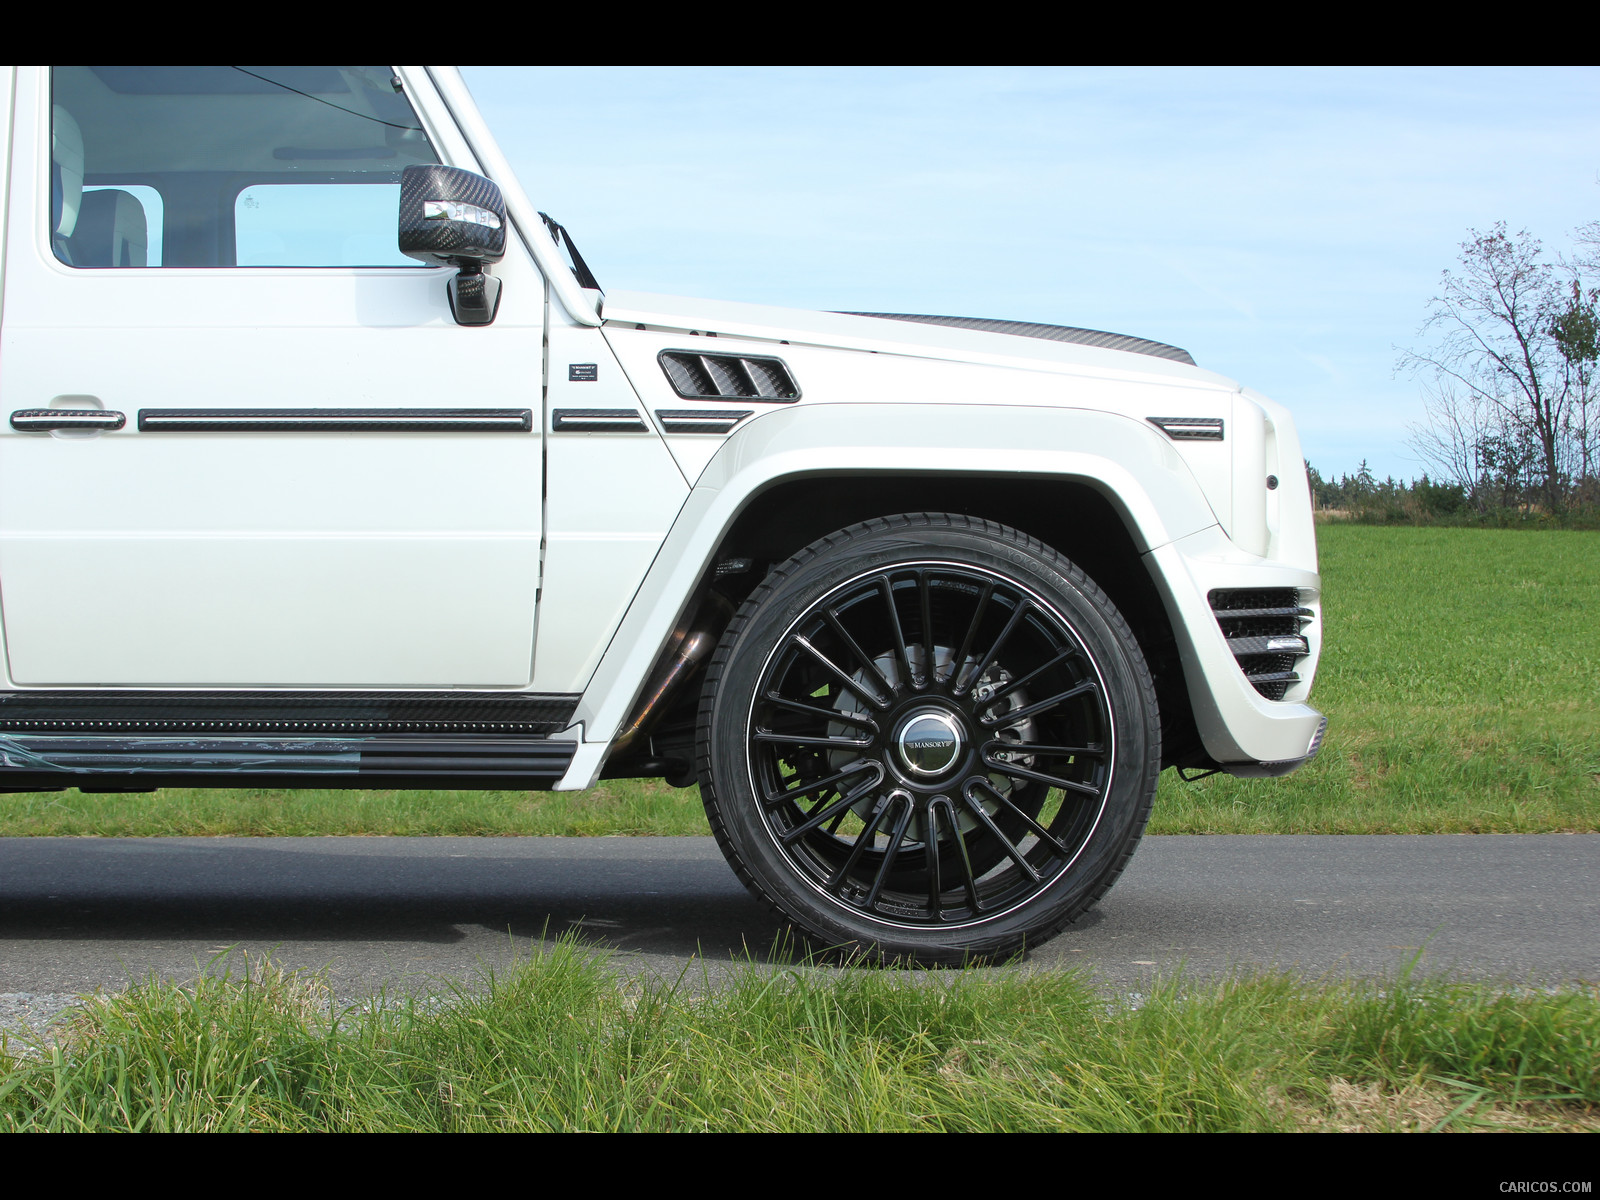 Mansory G-Couture based on Mercedes G-Class White - Side, #25 of 39